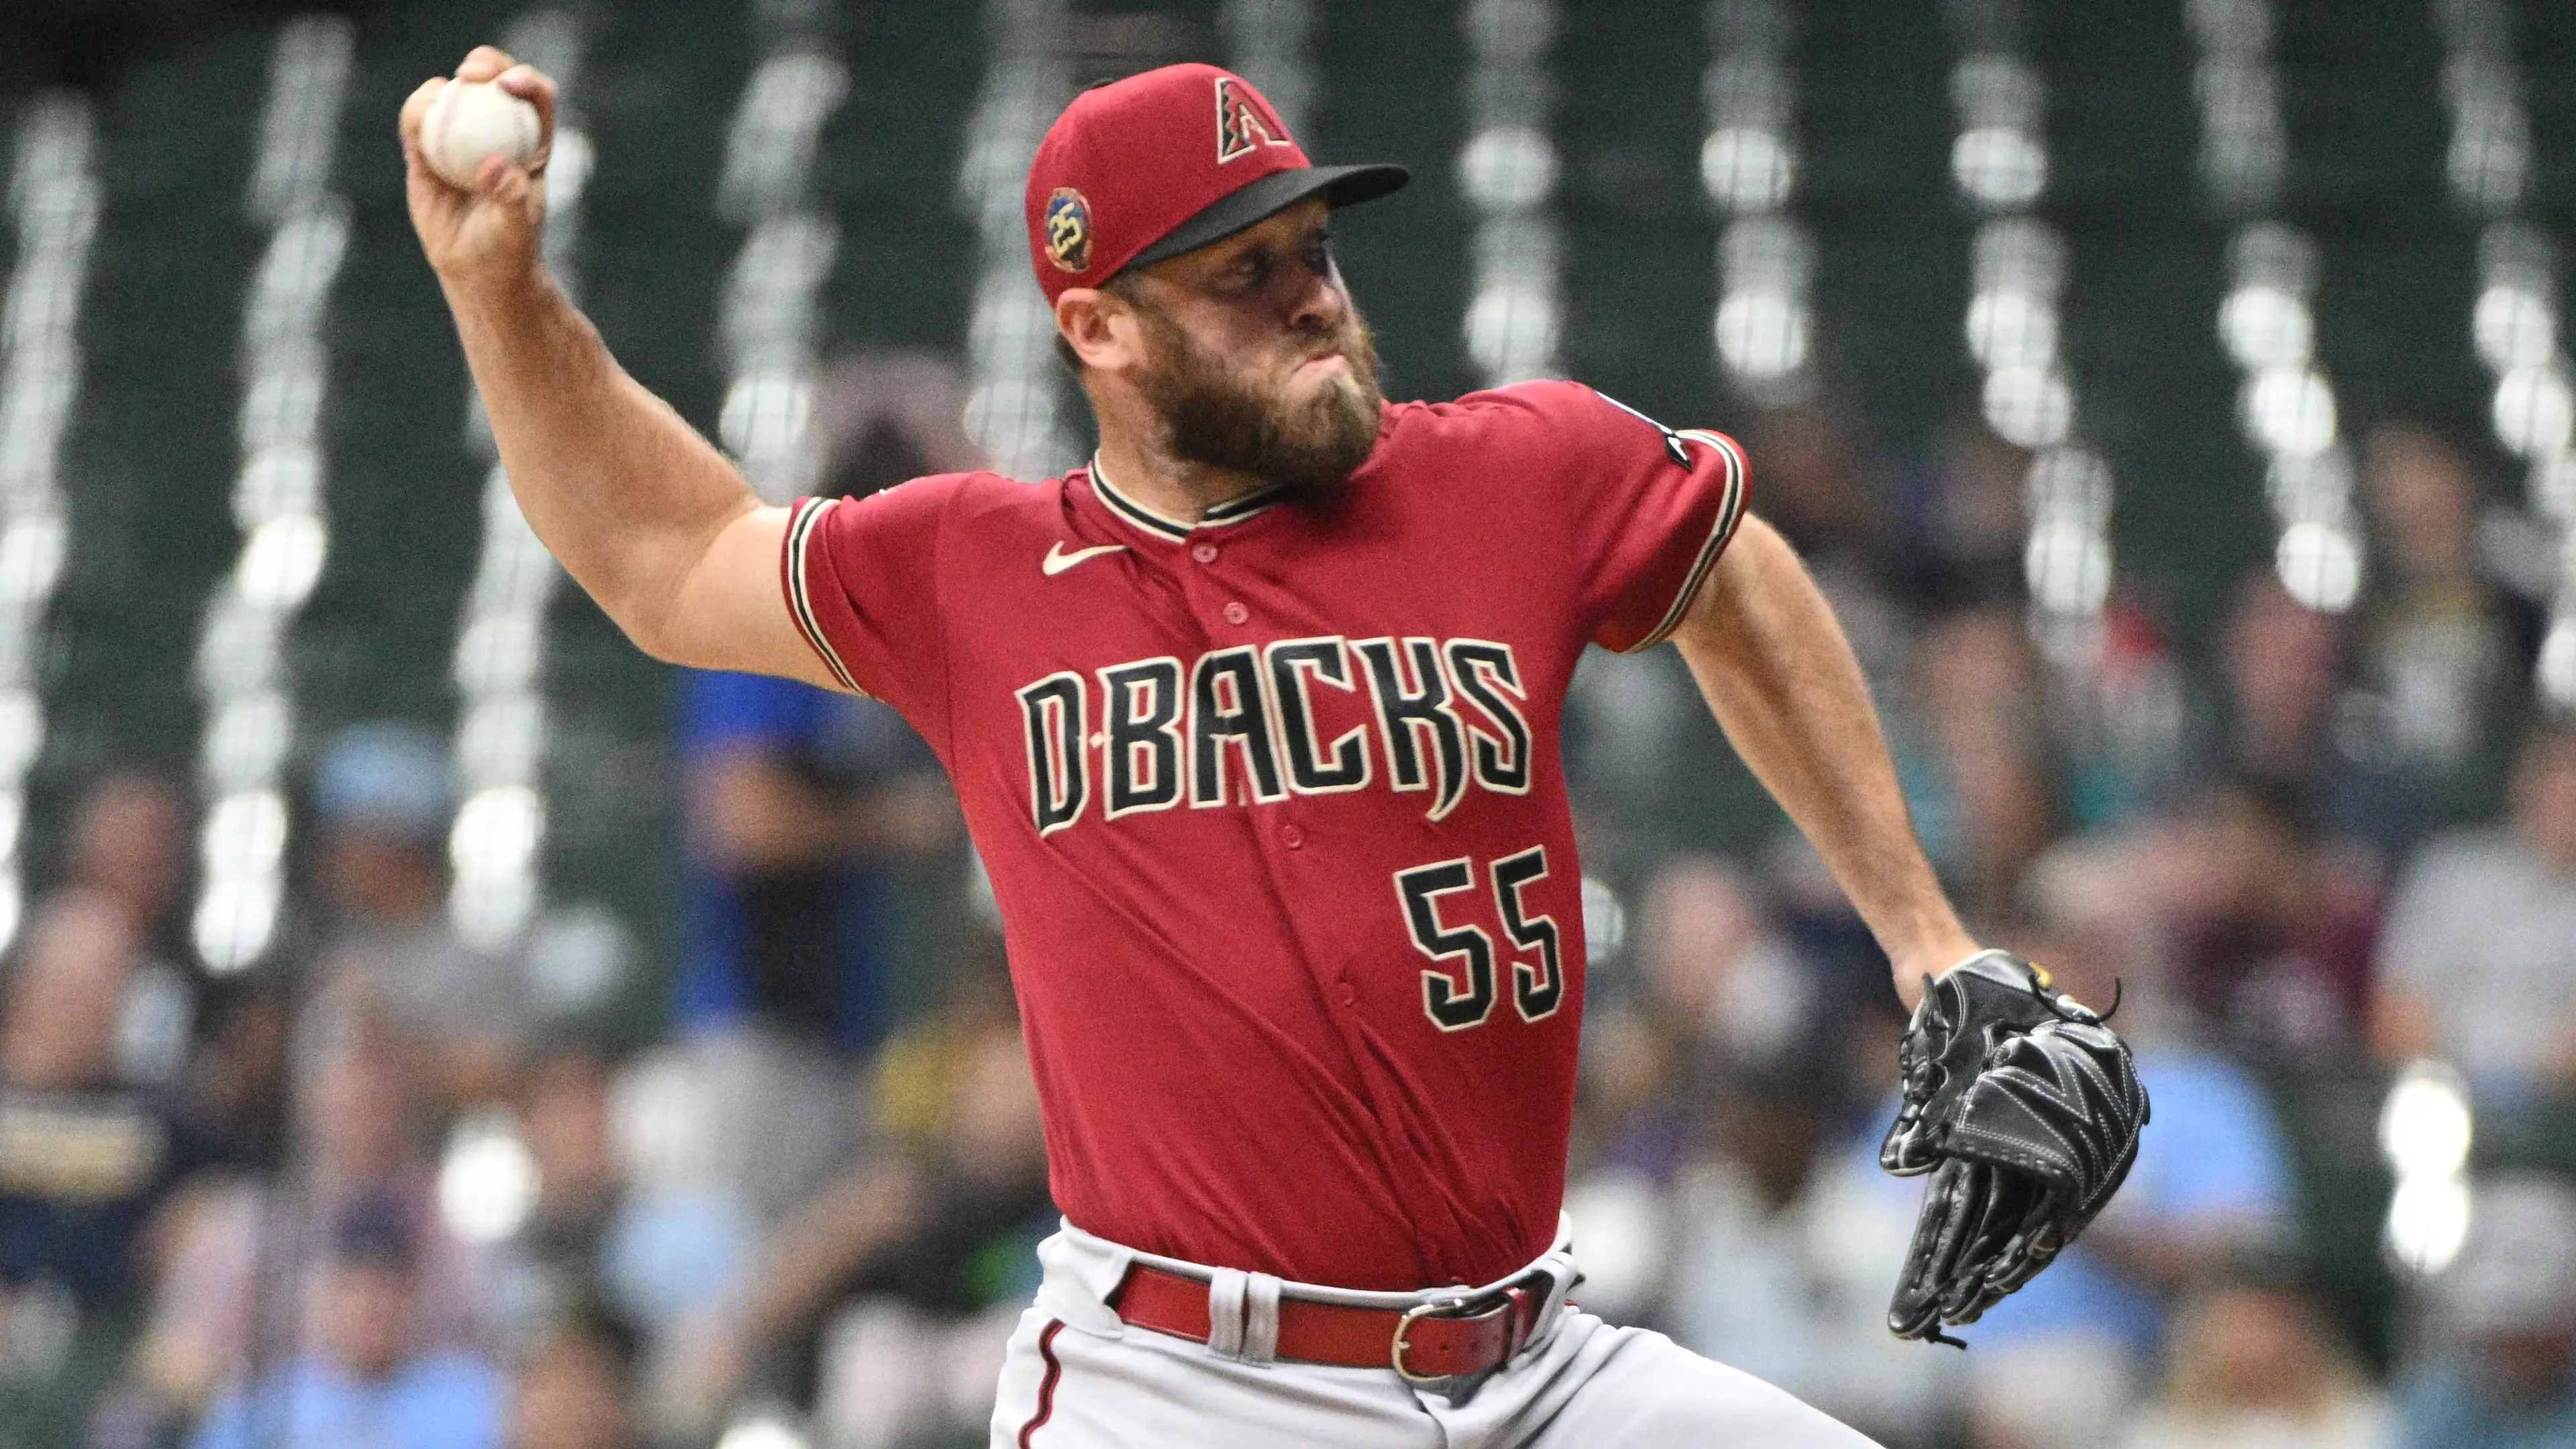 Arizona Diamondbacks relief pitcher Austin Adams (55) delivers a pitch against the Milwaukee Brewers in the sixth inning at American Family Field / Michael McLoone - USA TODAY Sports